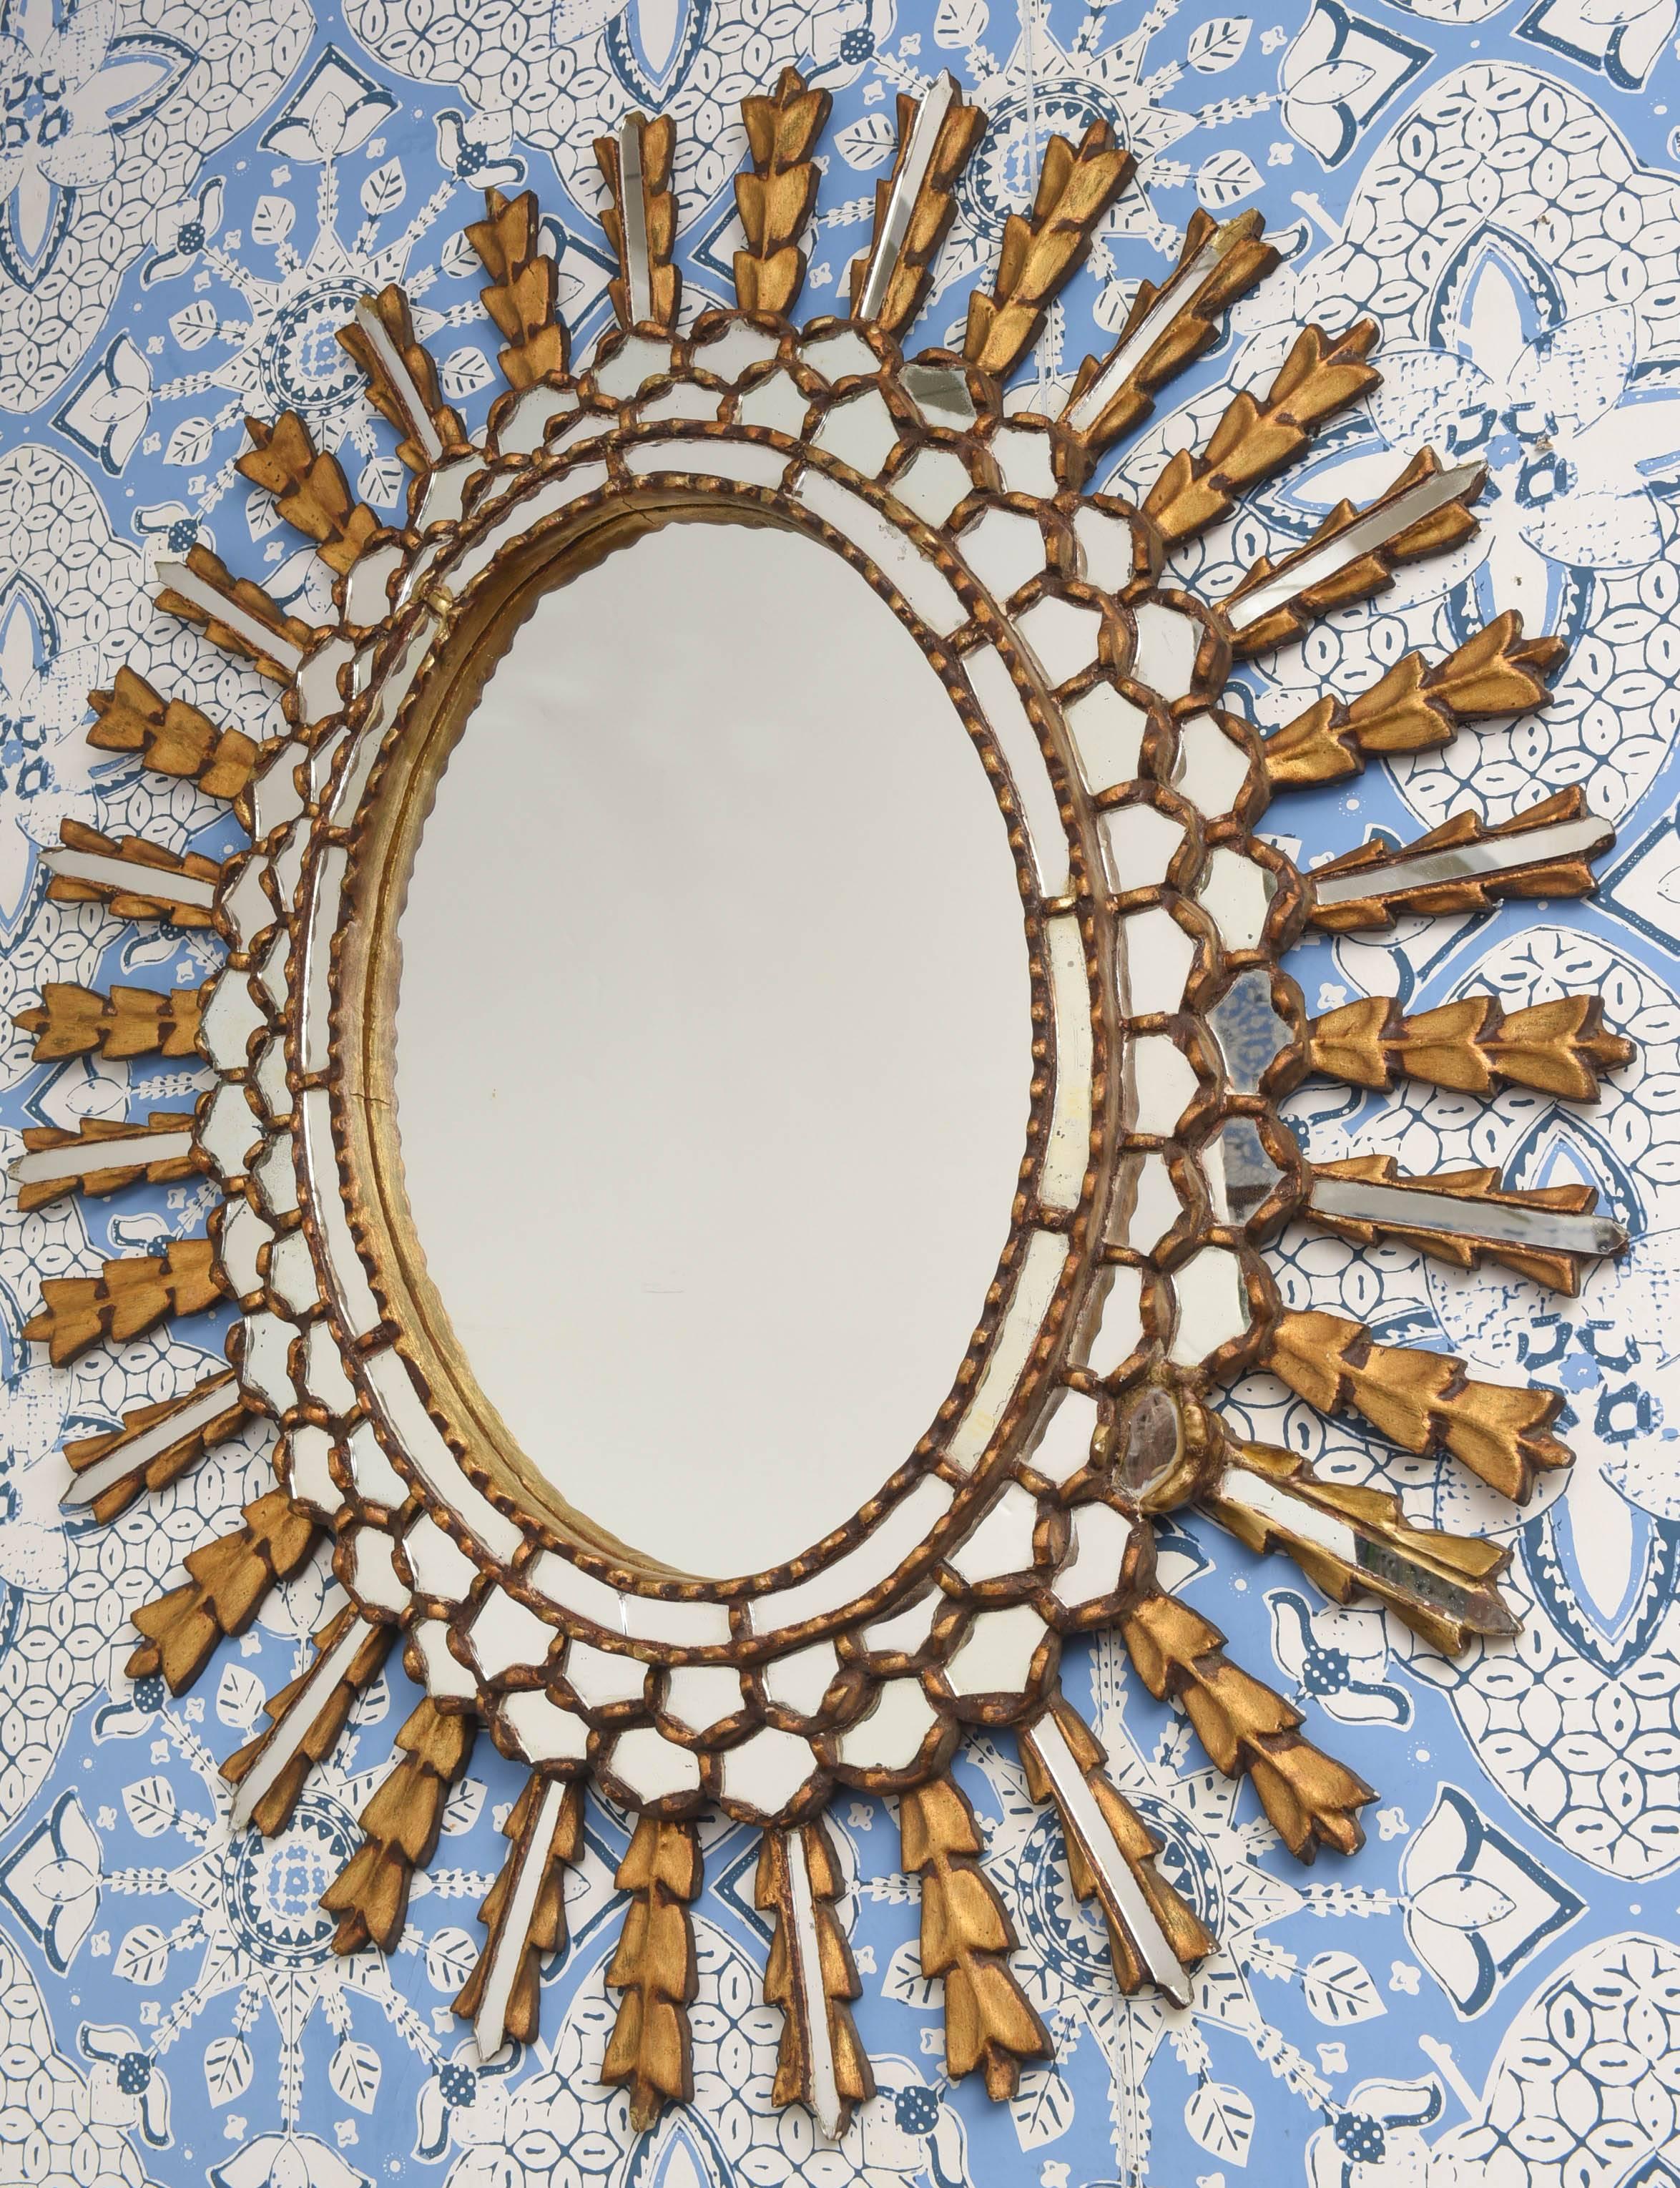 European gilt mirror with plenty of mirrors and details.